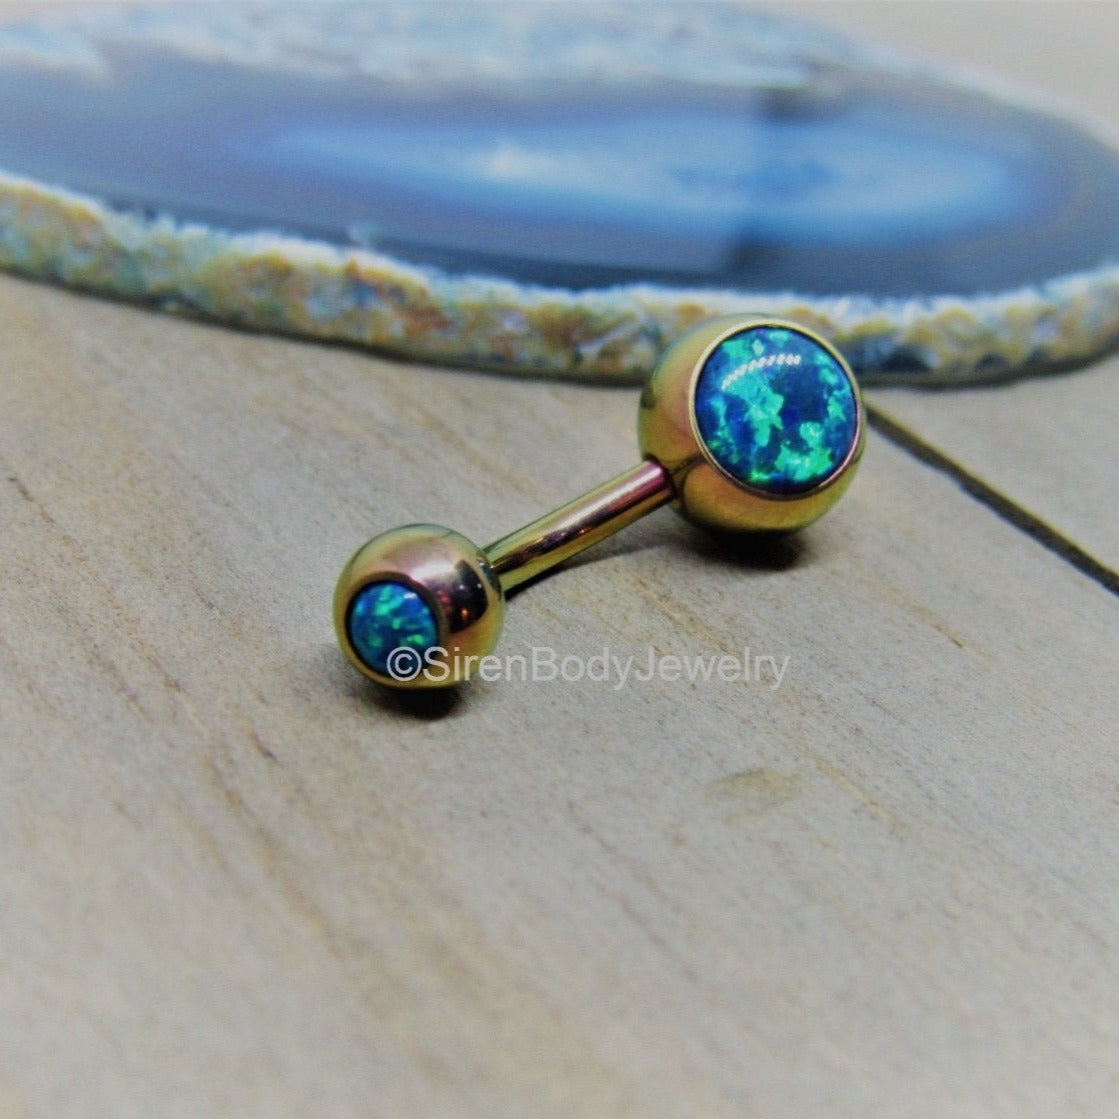 Stingray Belly Button Piercing Ring